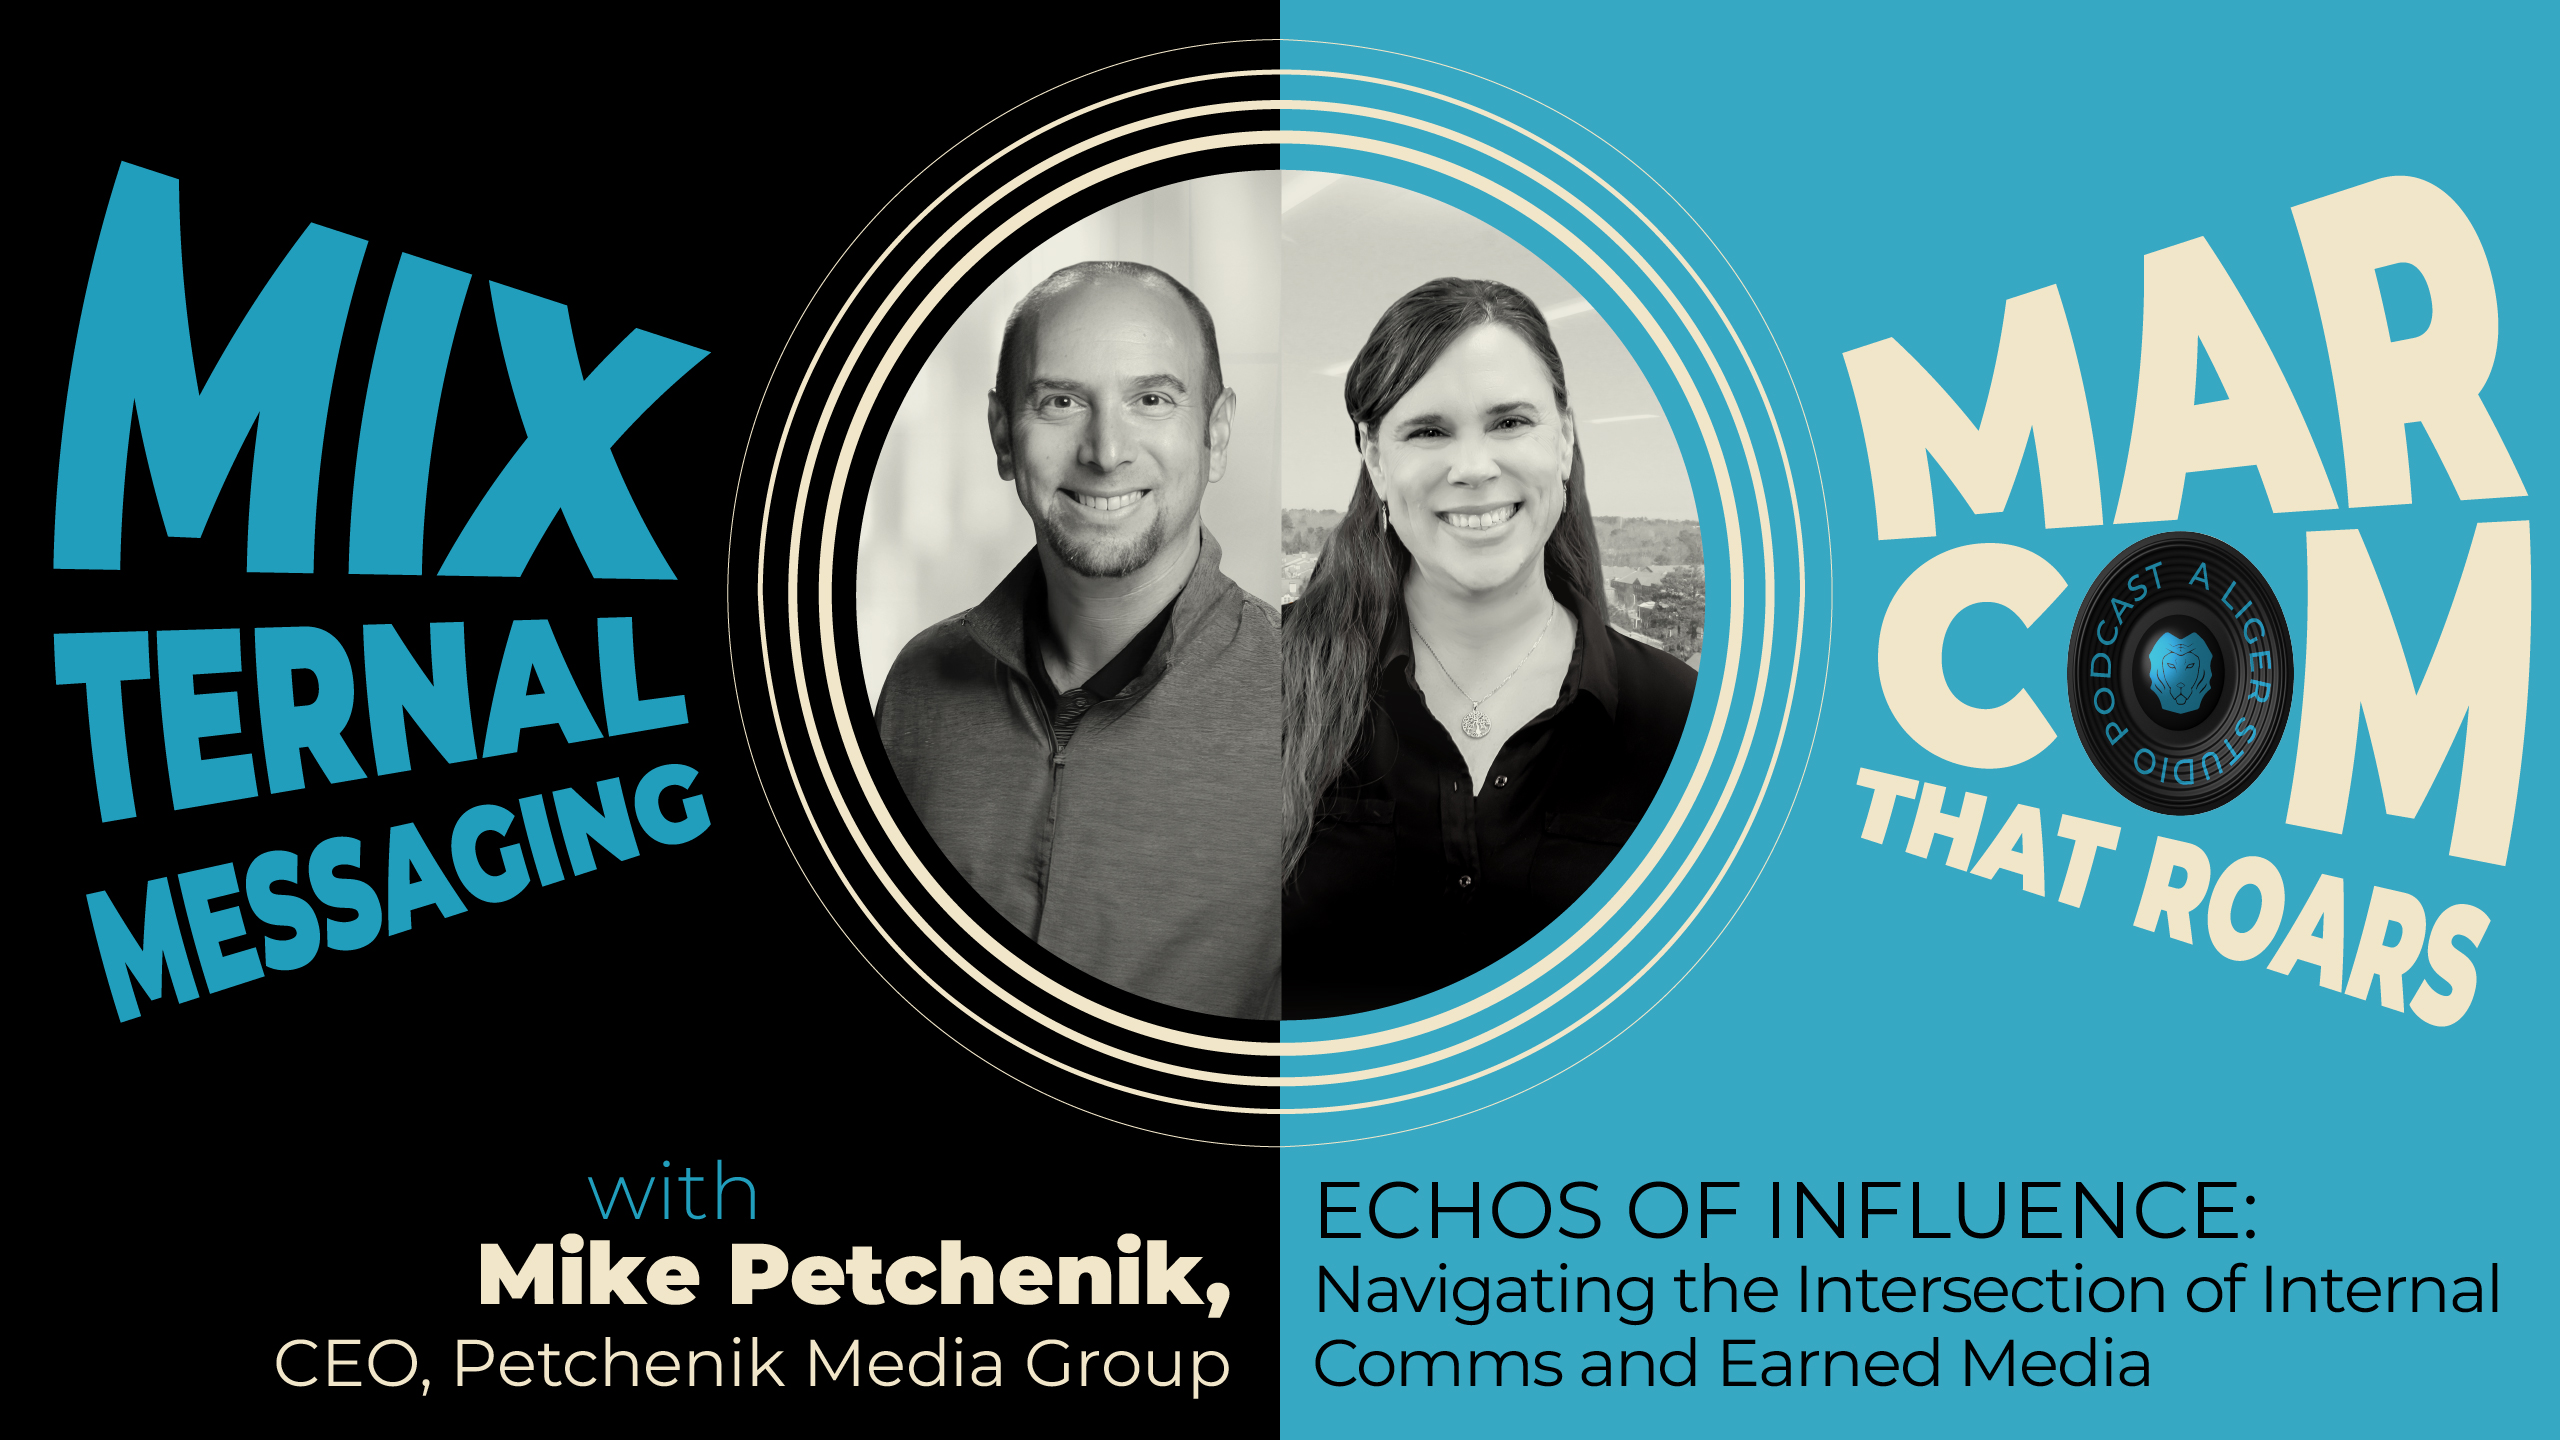 Echos of Influence: The Intersection of Internal Comms and Earned Media with Mike Petchenik